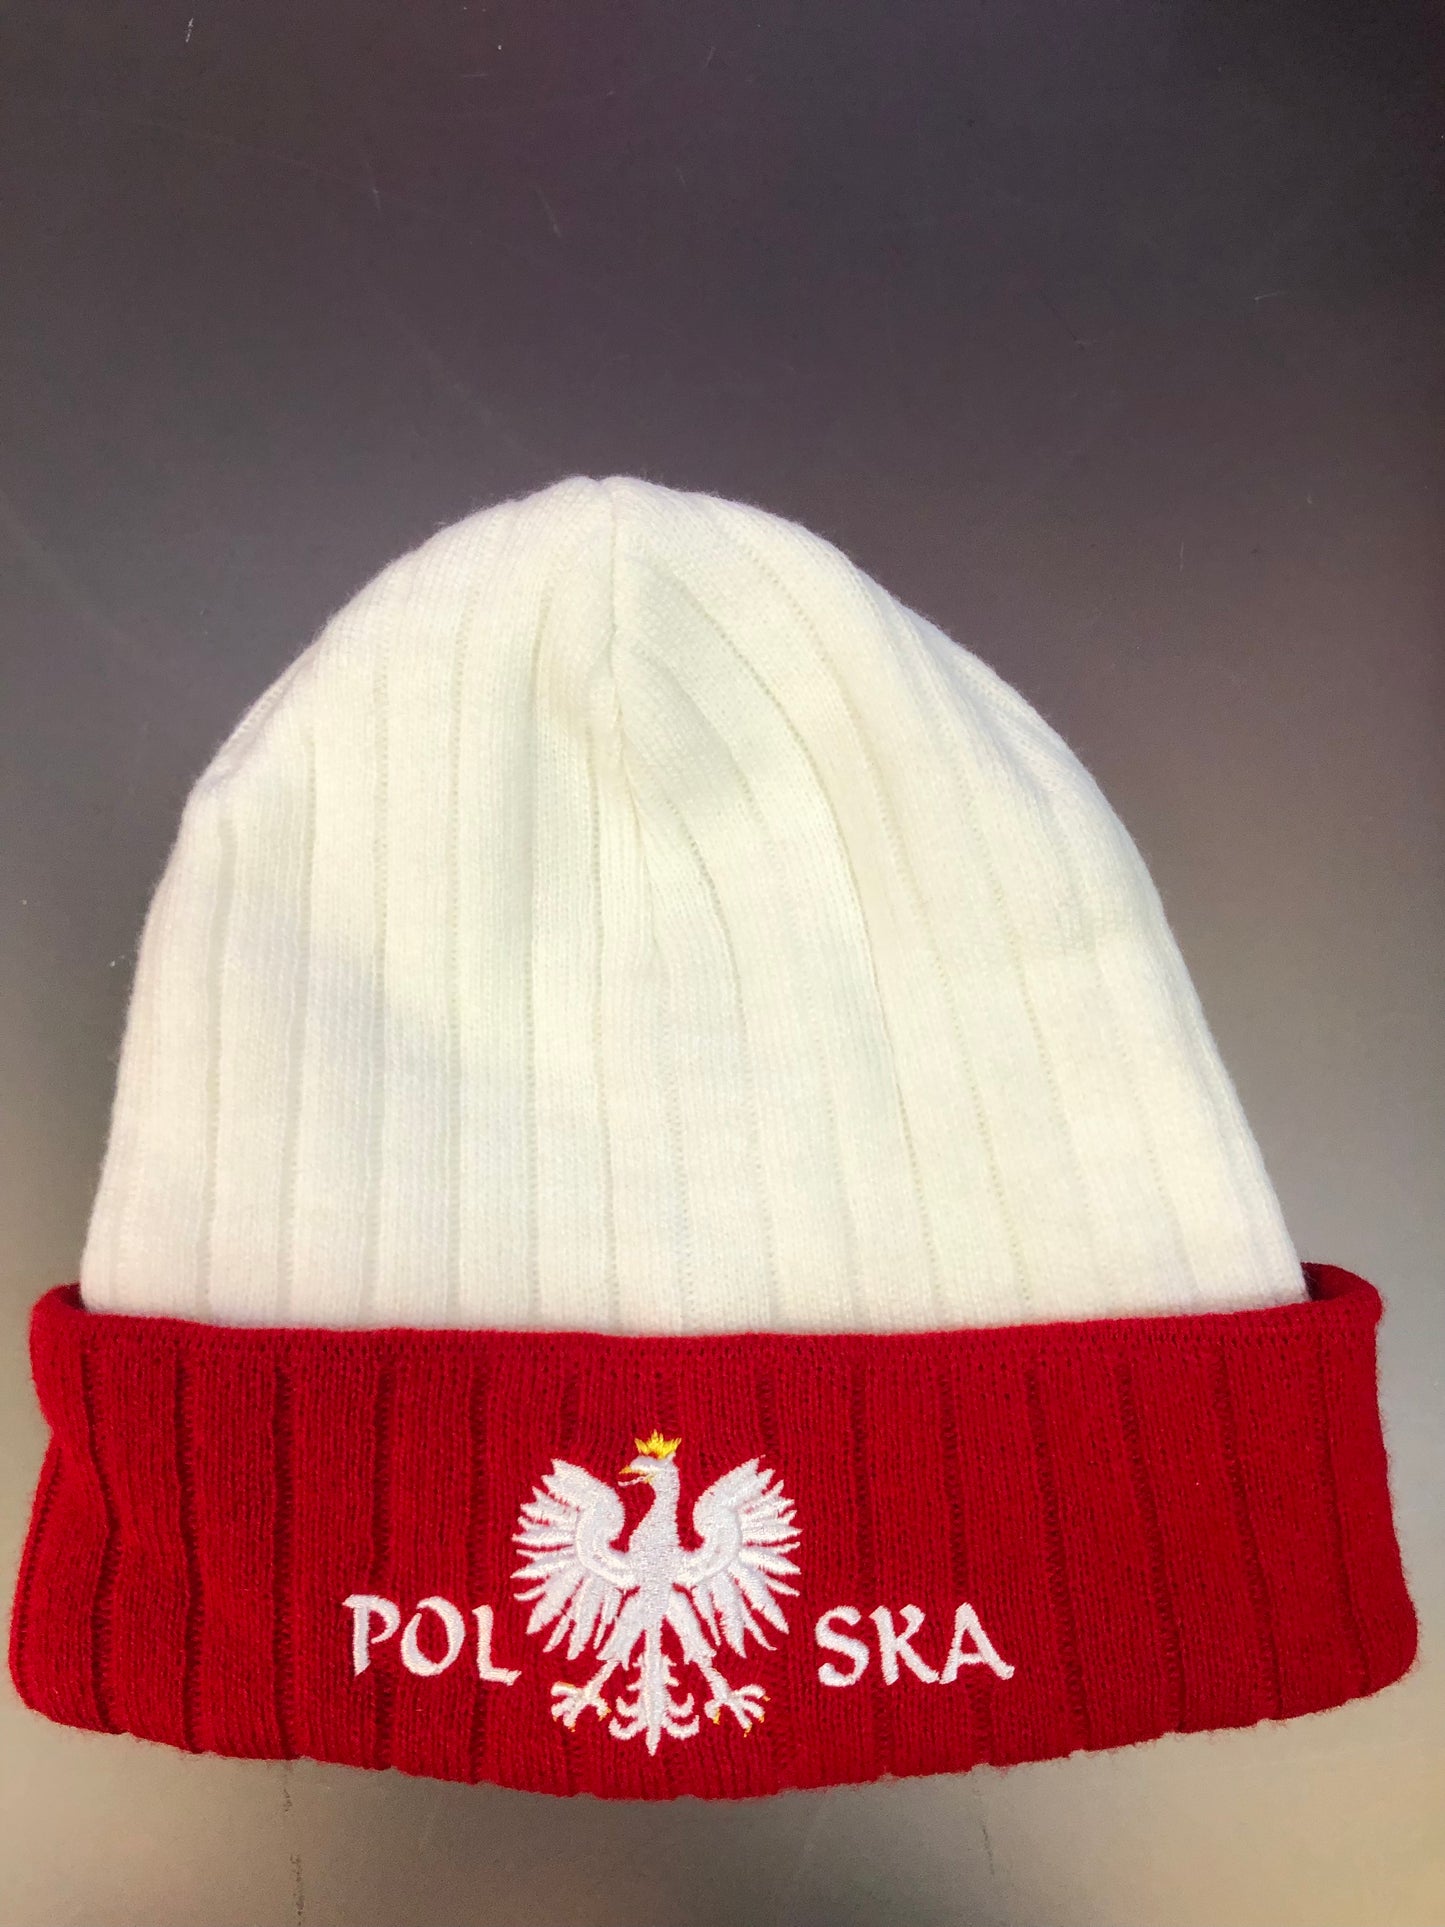 Polish Polska 1 Knit Winter Hat -WHITE/RED With  Eagle- Made in Poland